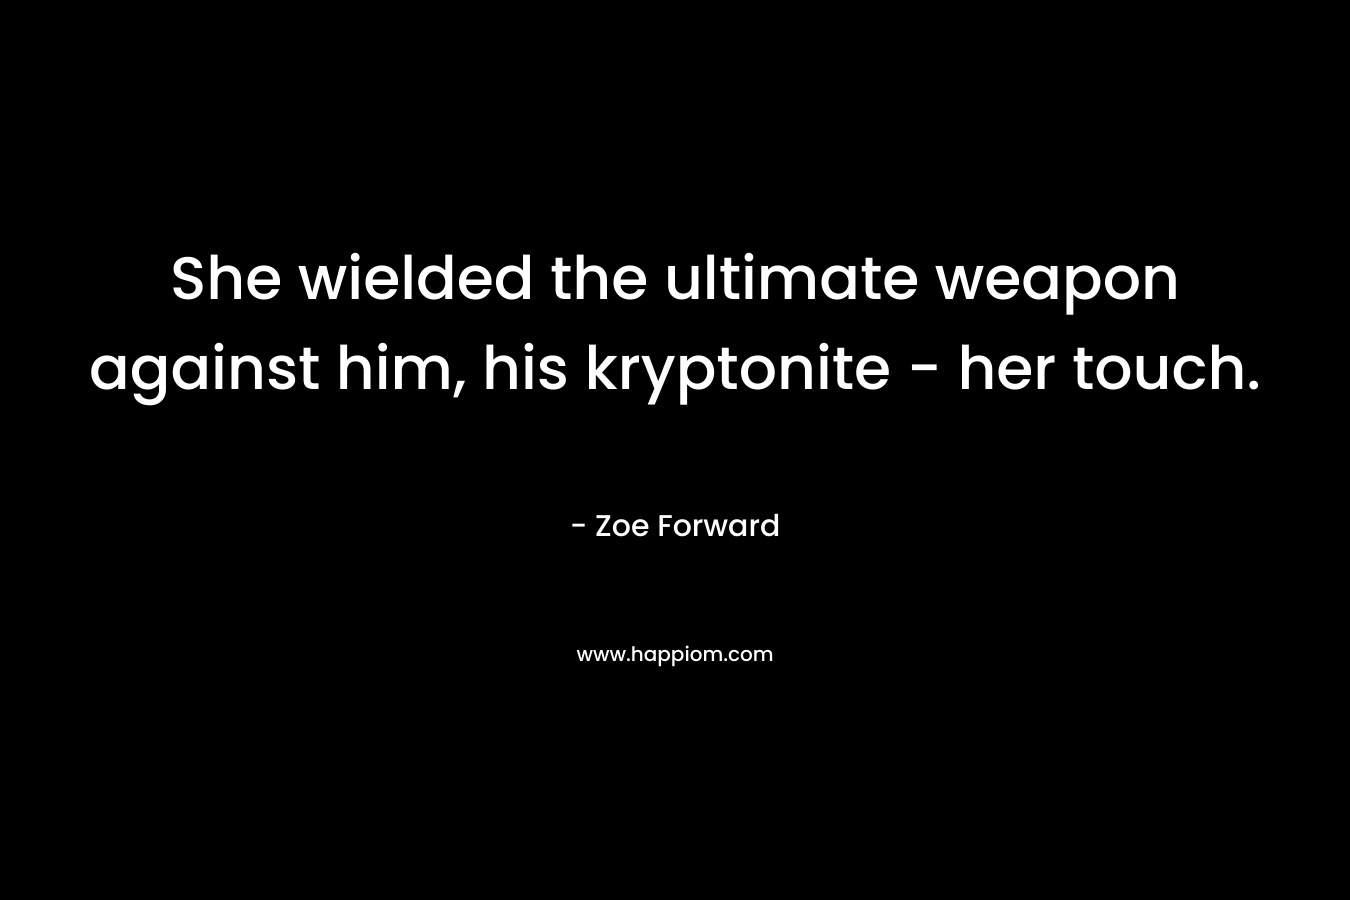 She wielded the ultimate weapon against him, his kryptonite - her touch.